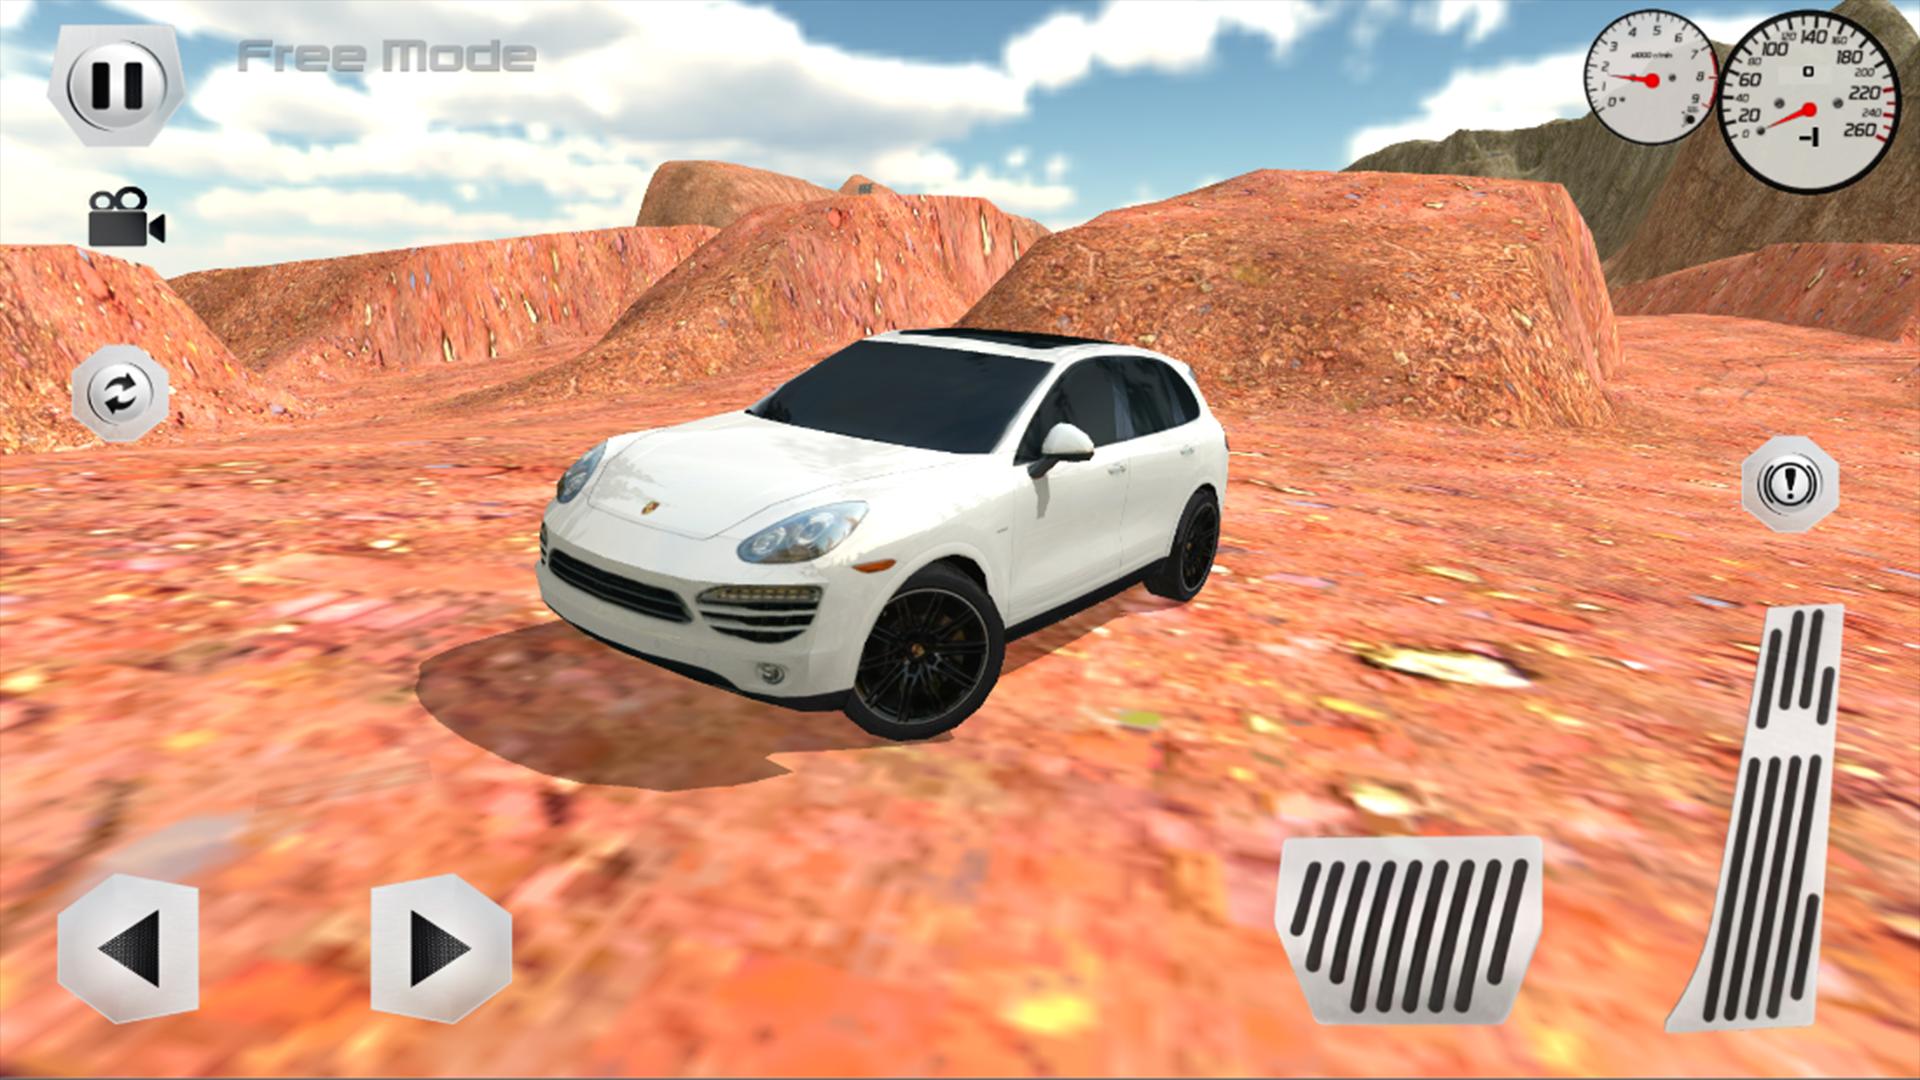 Offroad car driving game все открыта. Offroad car Driving. Offroad car Driving game. OTP Offroad car Driving торт. City car Driving Jeep Grand Cherokee.